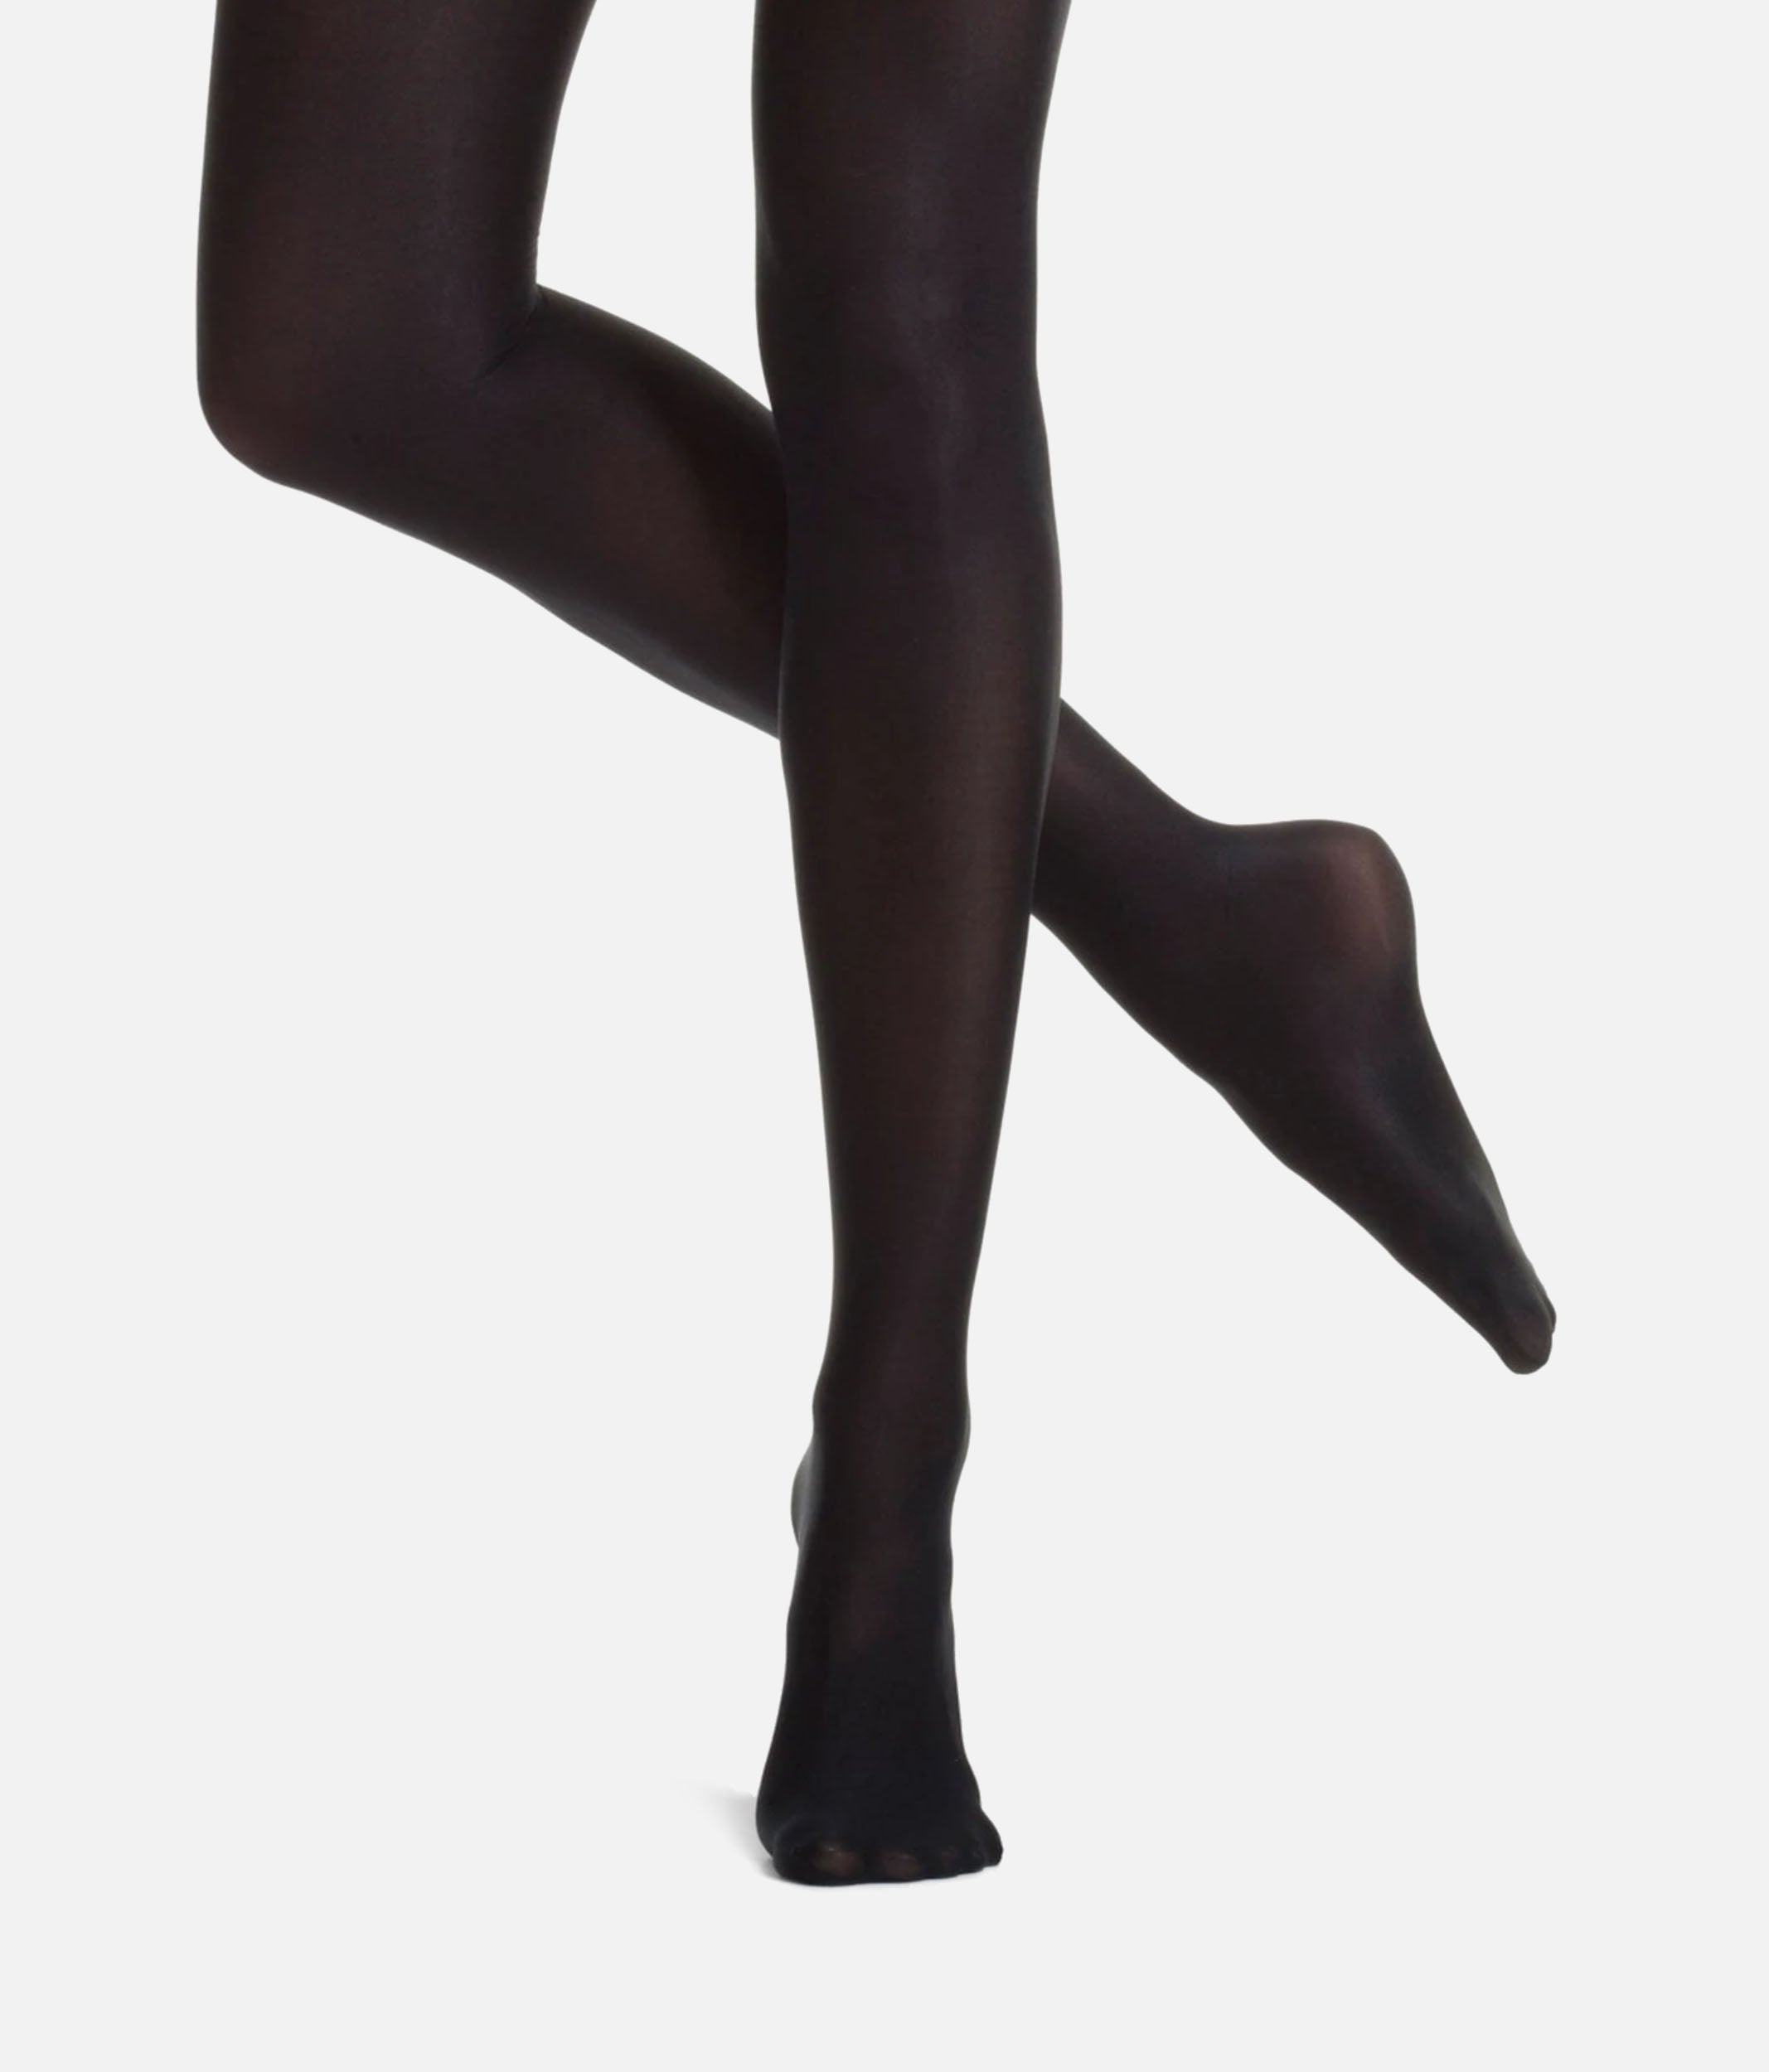 Ultra Shimmery Tights for Kids Stirrup Foot Ballet Dance Performance  Pantyhose